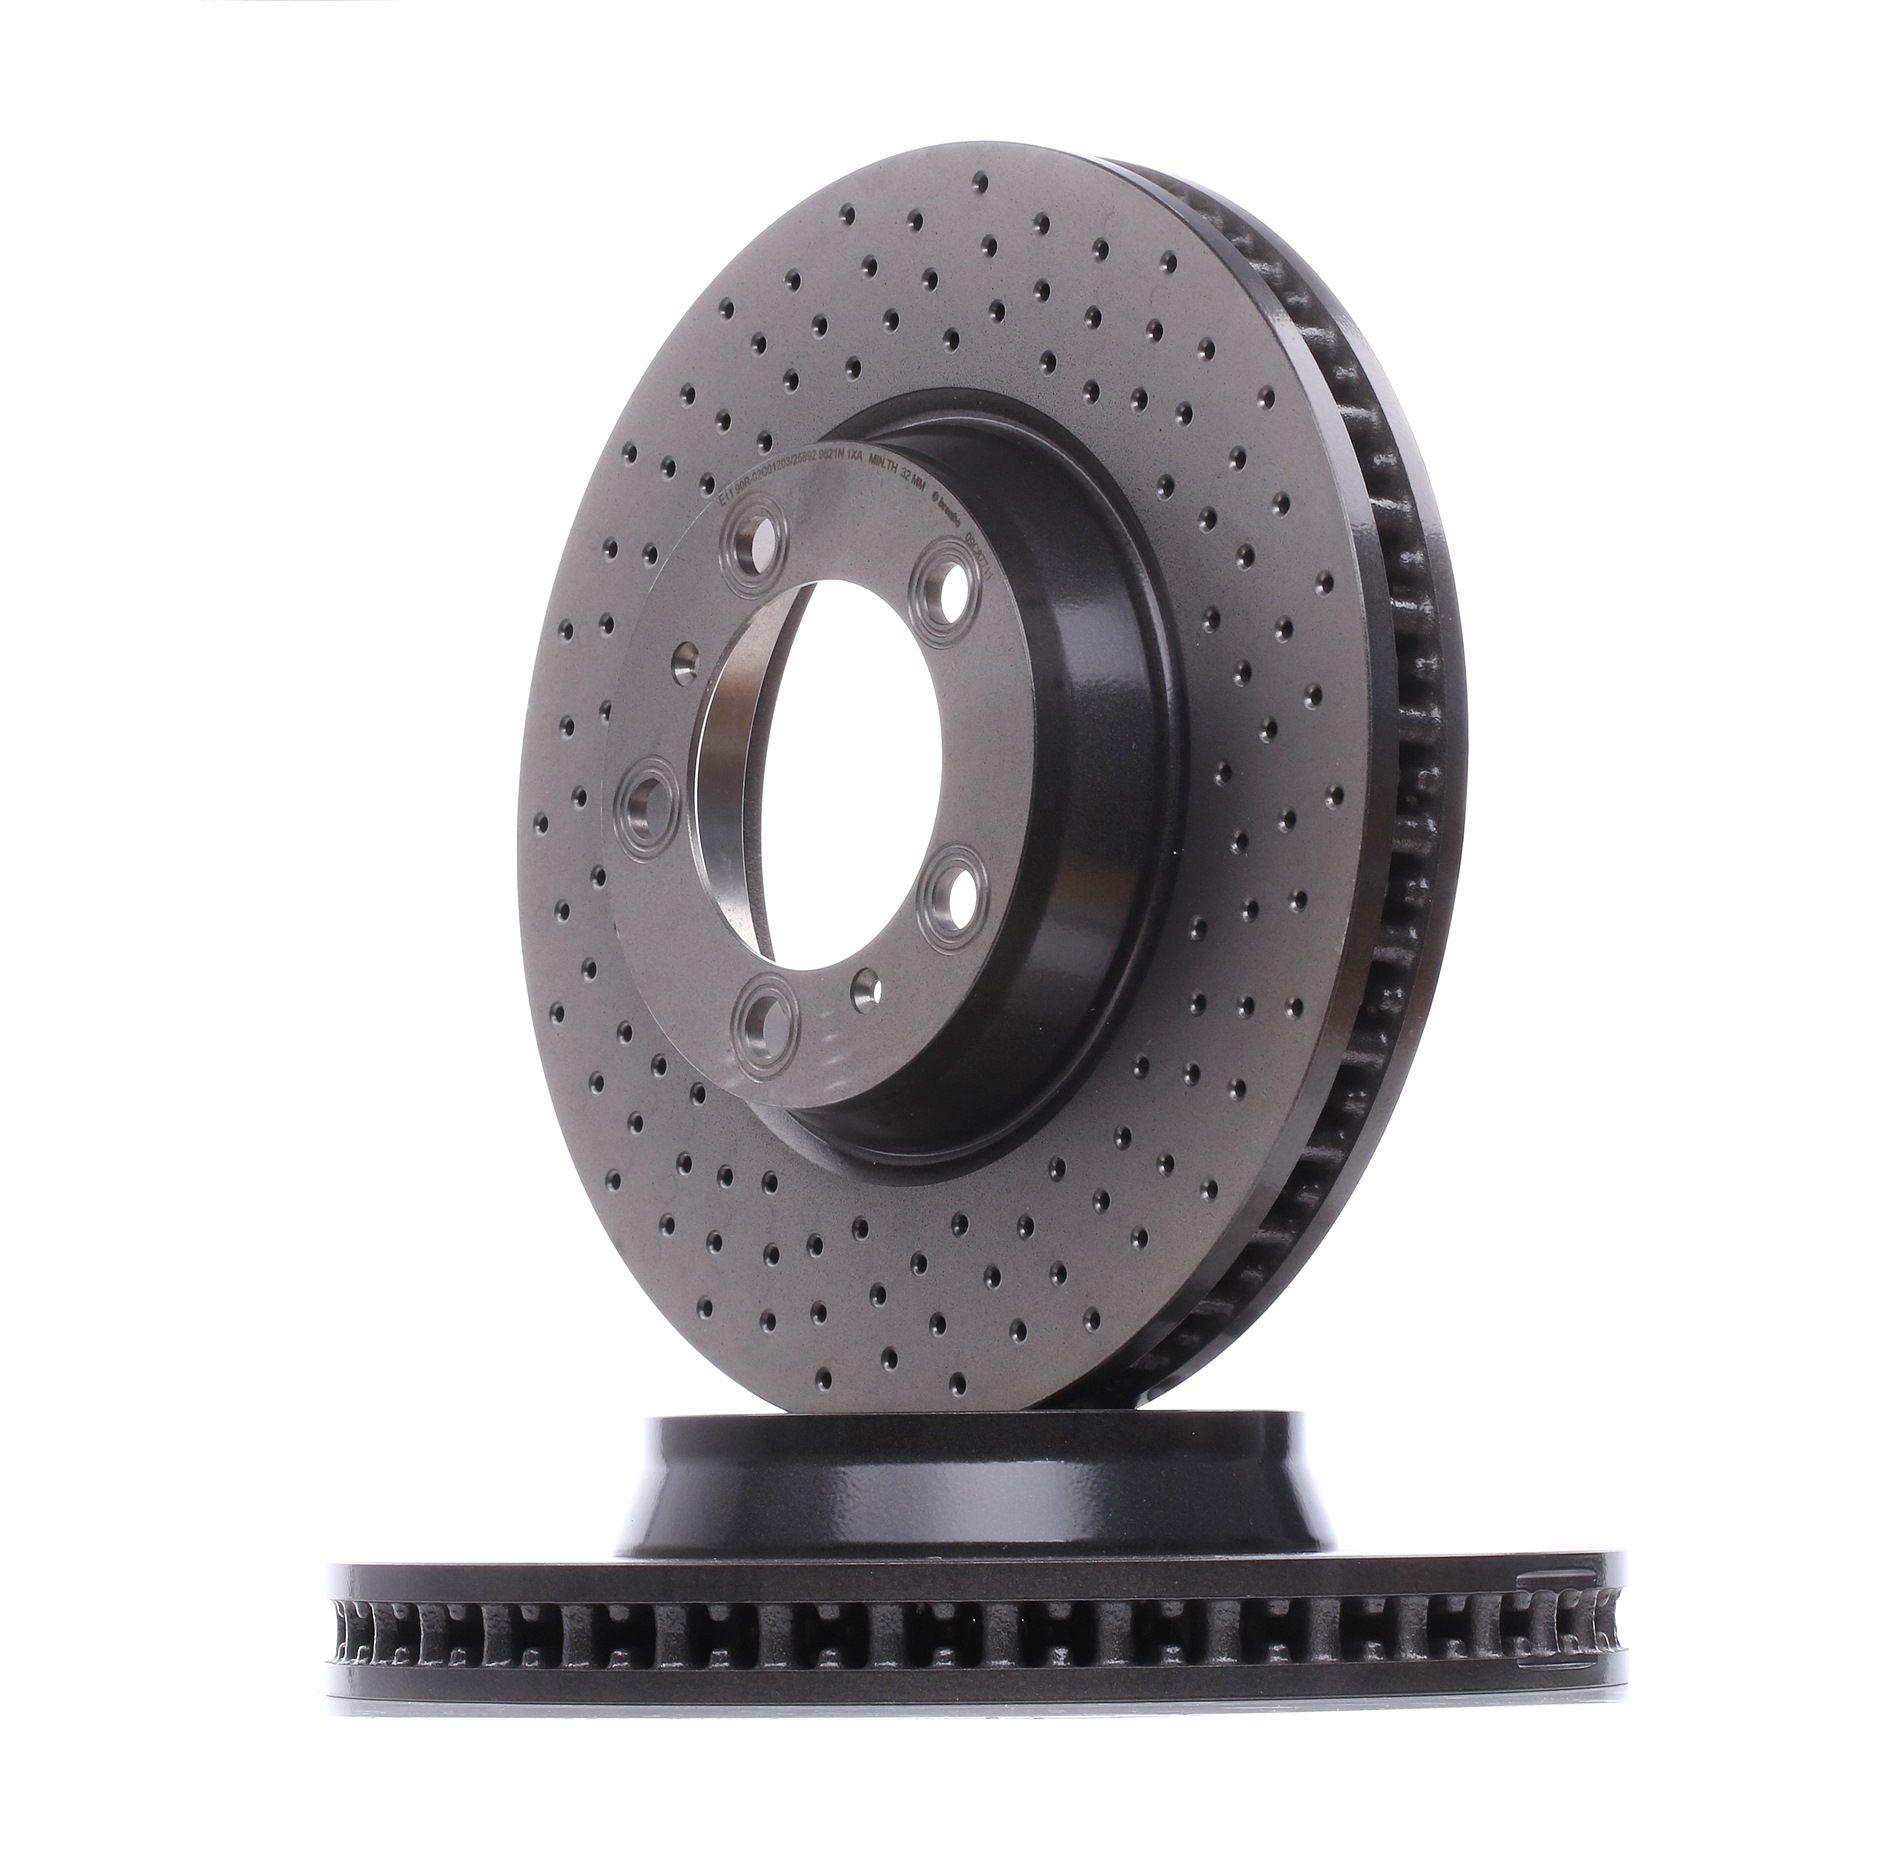 BREMBO COATED DISC LINE 09.C877.11 Brake disc 330x34mm, 5, perforated/vented, Coated, High-carbon